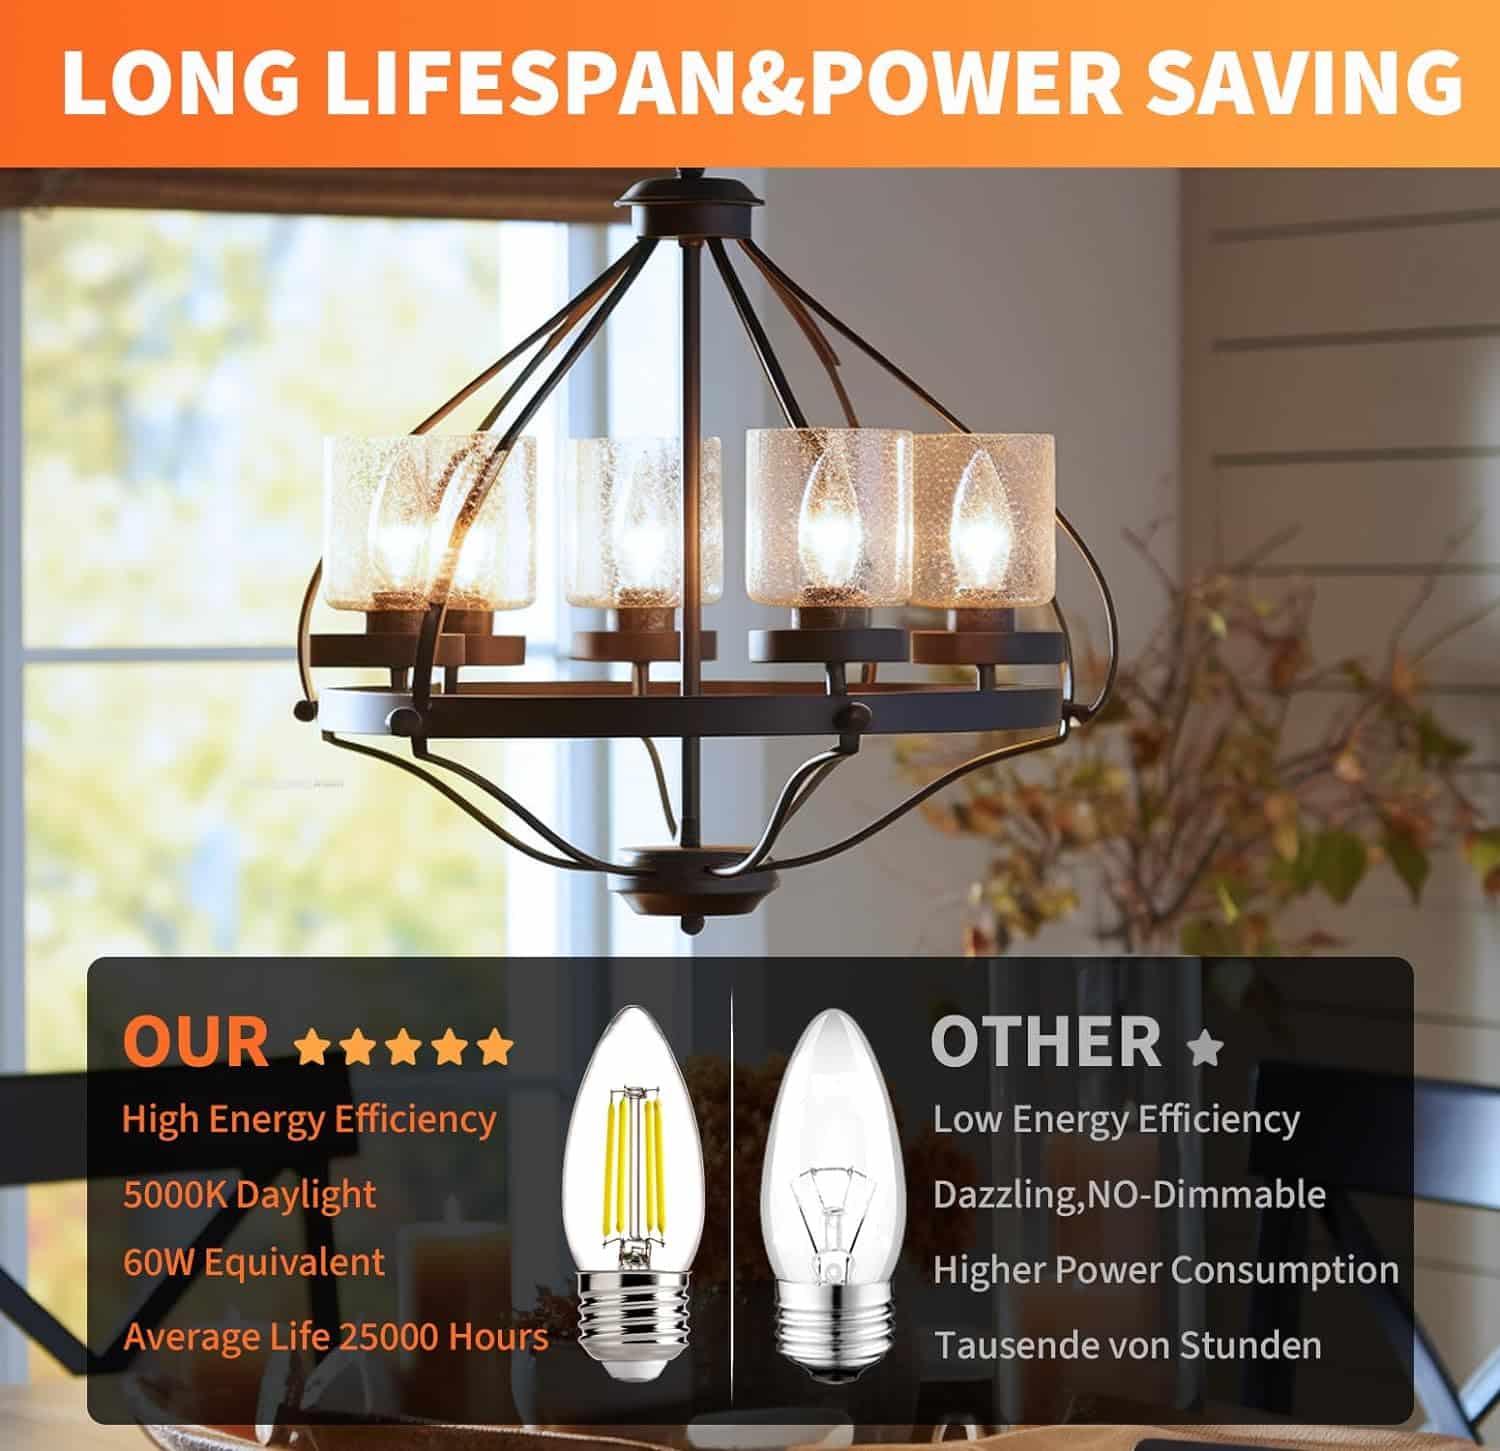 ALAMPEVER Dimmable LED Light Bulb Review